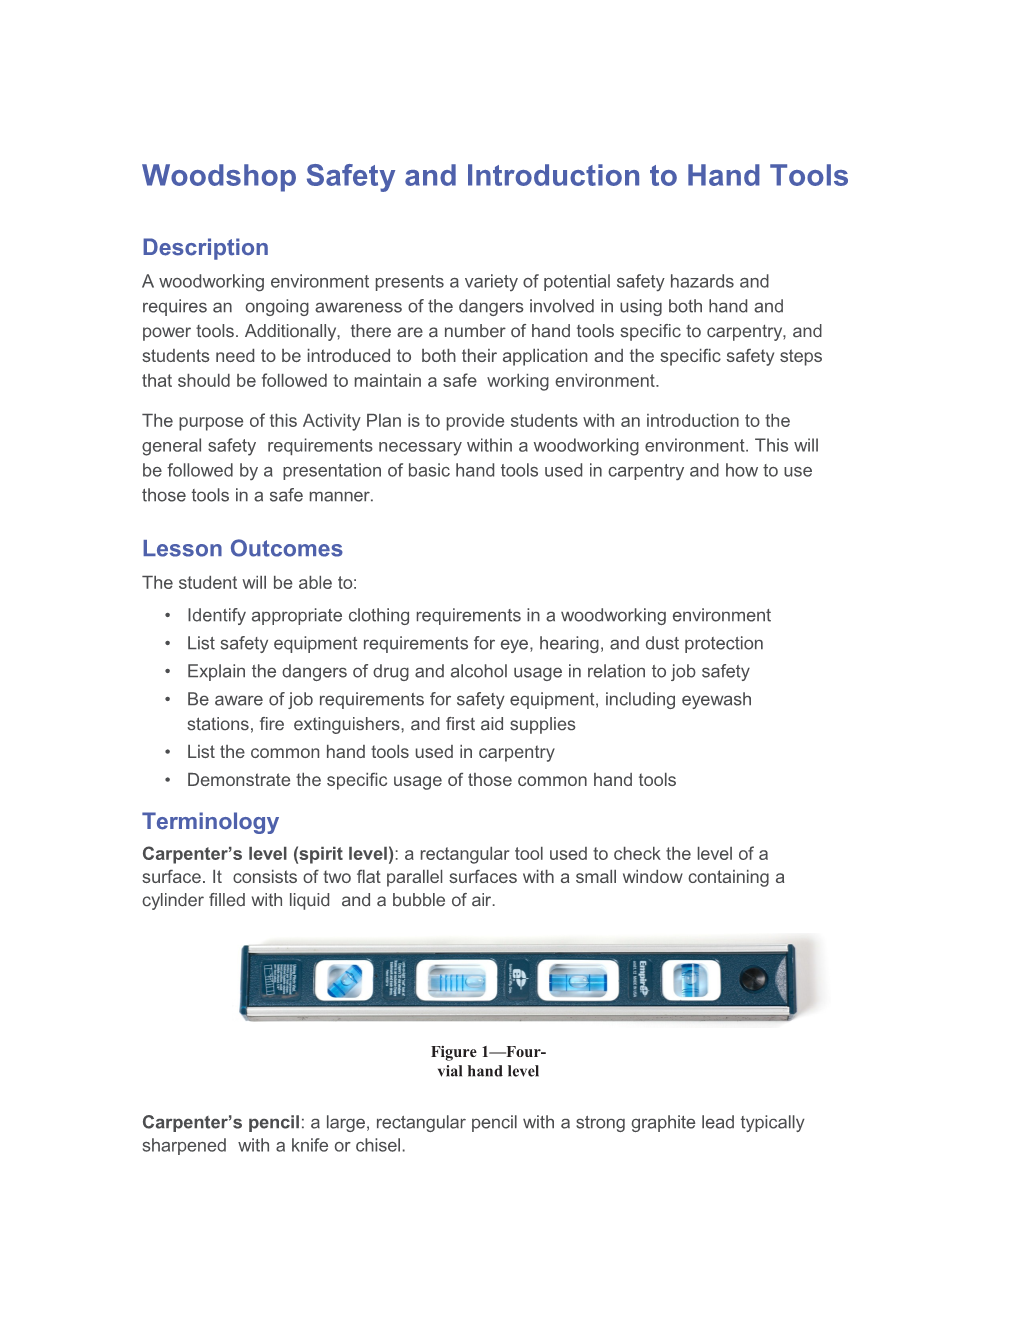 A Woodworking Environmentpresents a Variety Ofpotential Safetyhazards and Requires